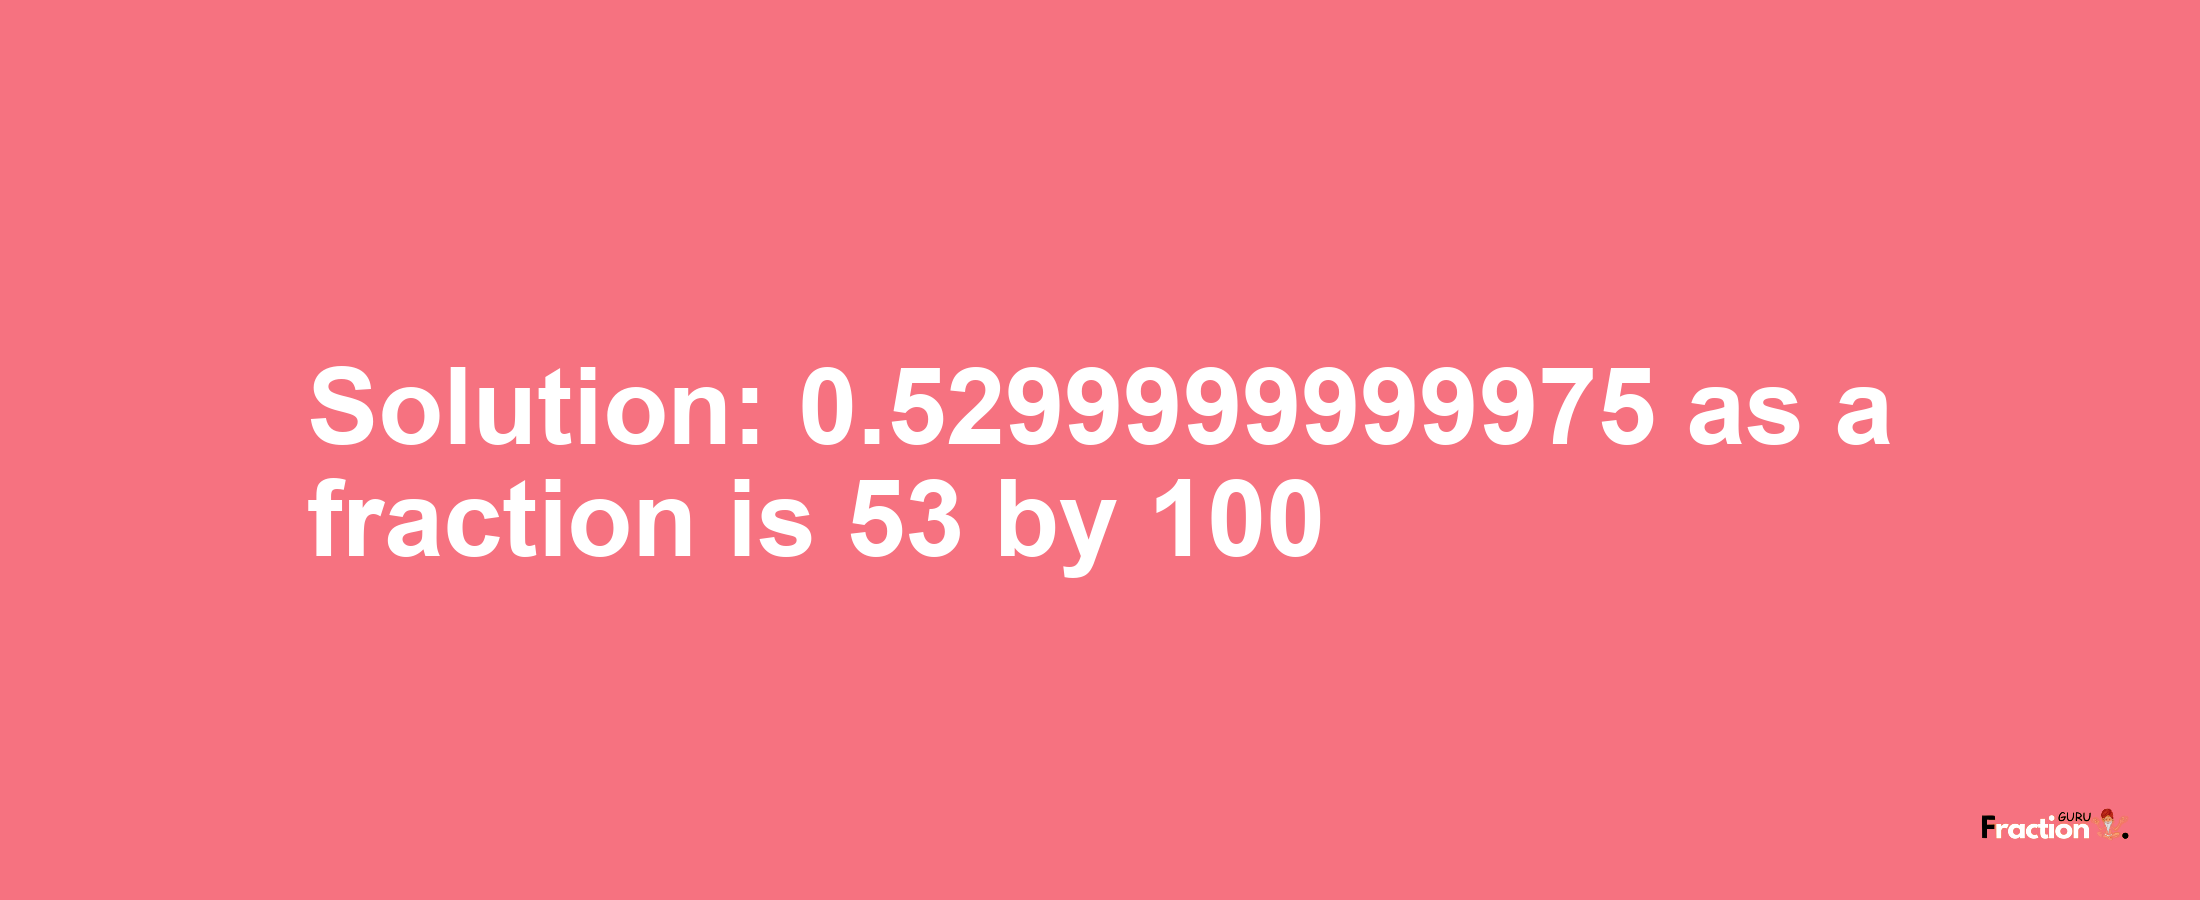 Solution:0.5299999999975 as a fraction is 53/100